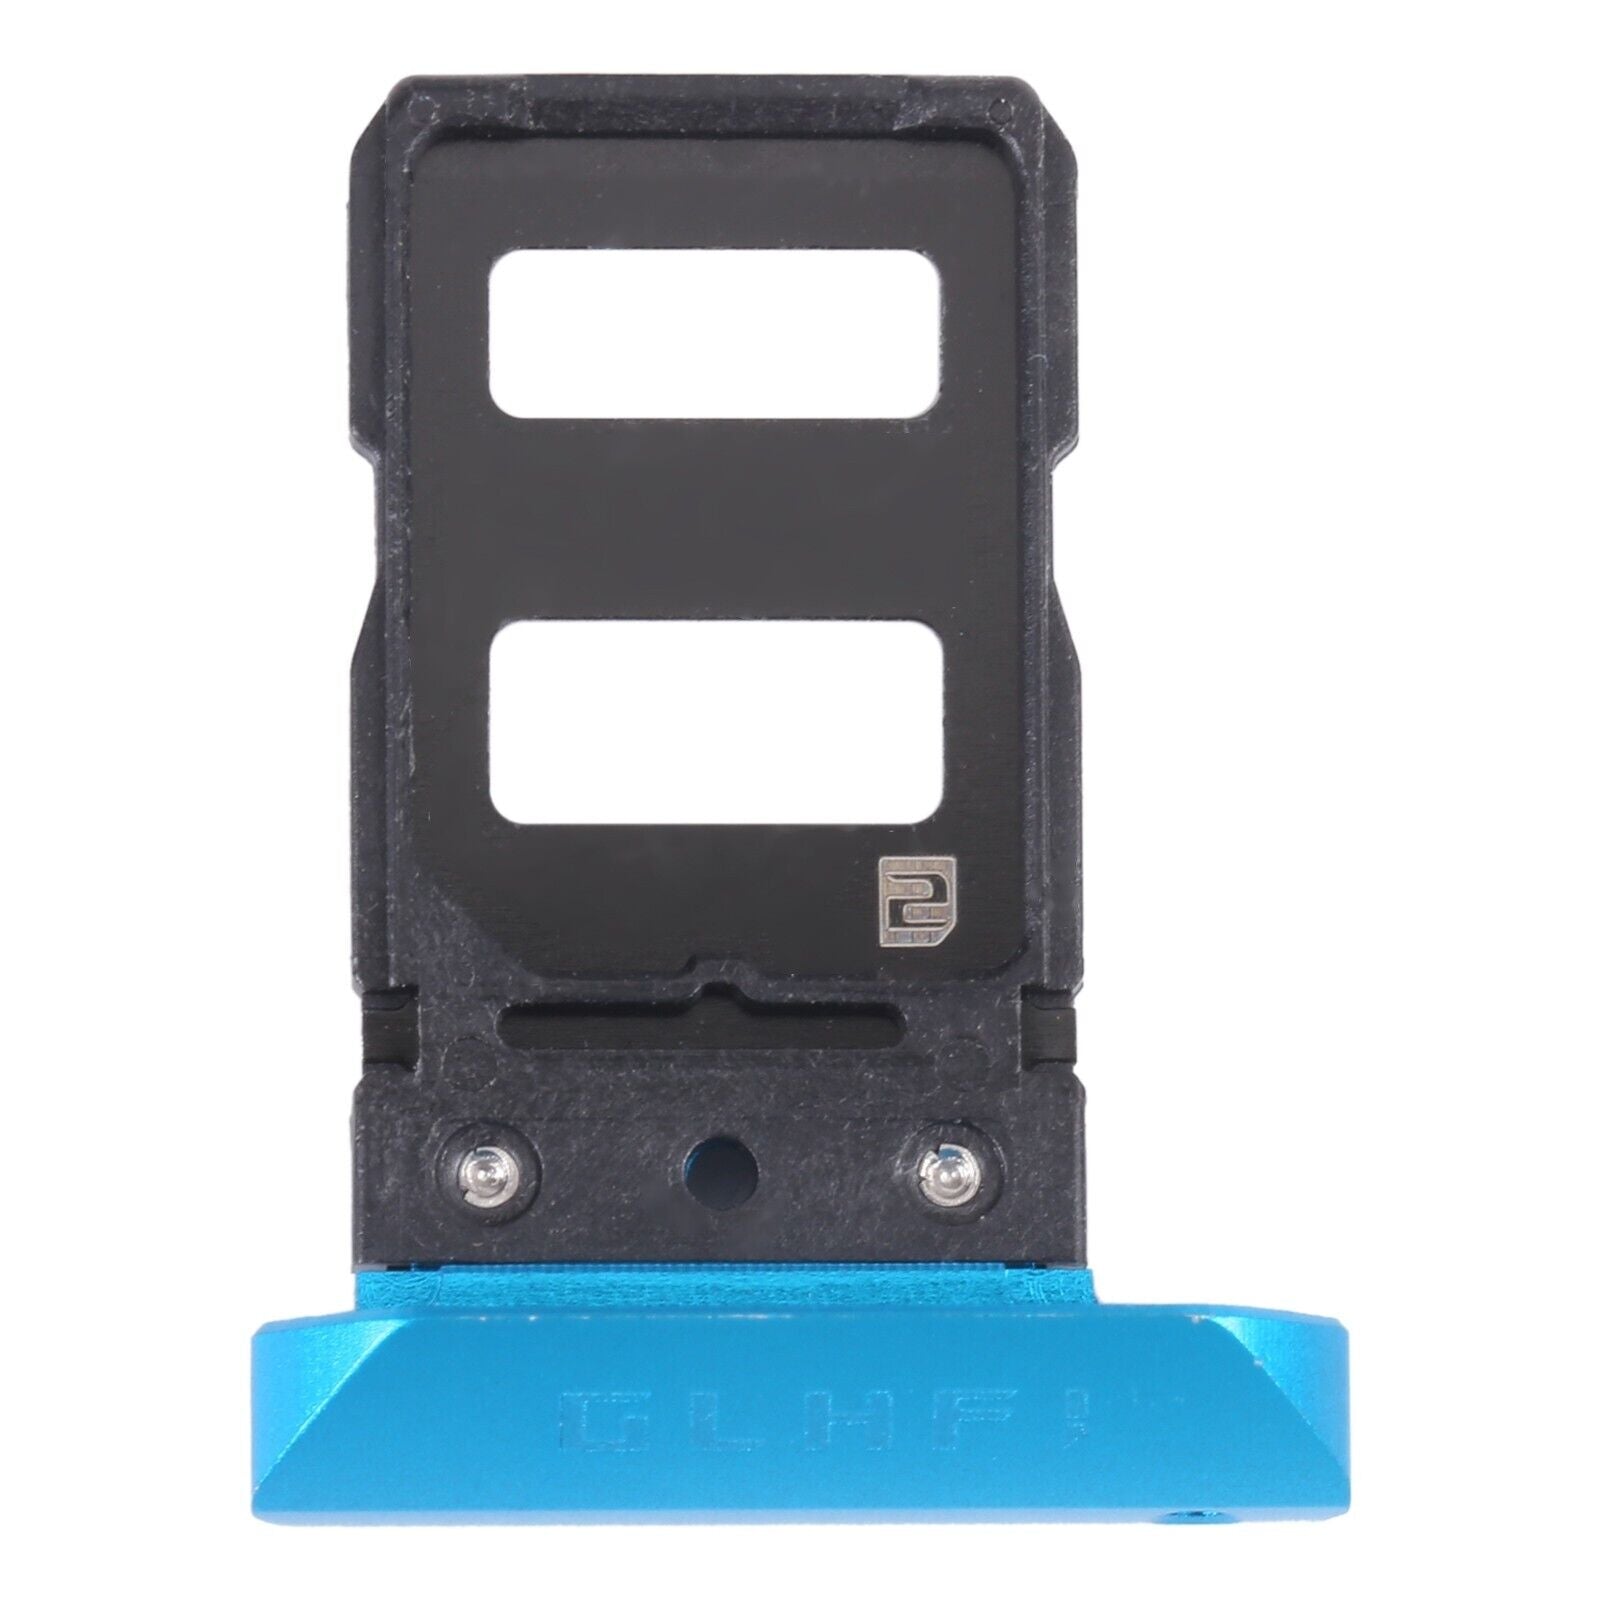 Sim Card Tray Holder for Asus Rog Phone 5 Blue